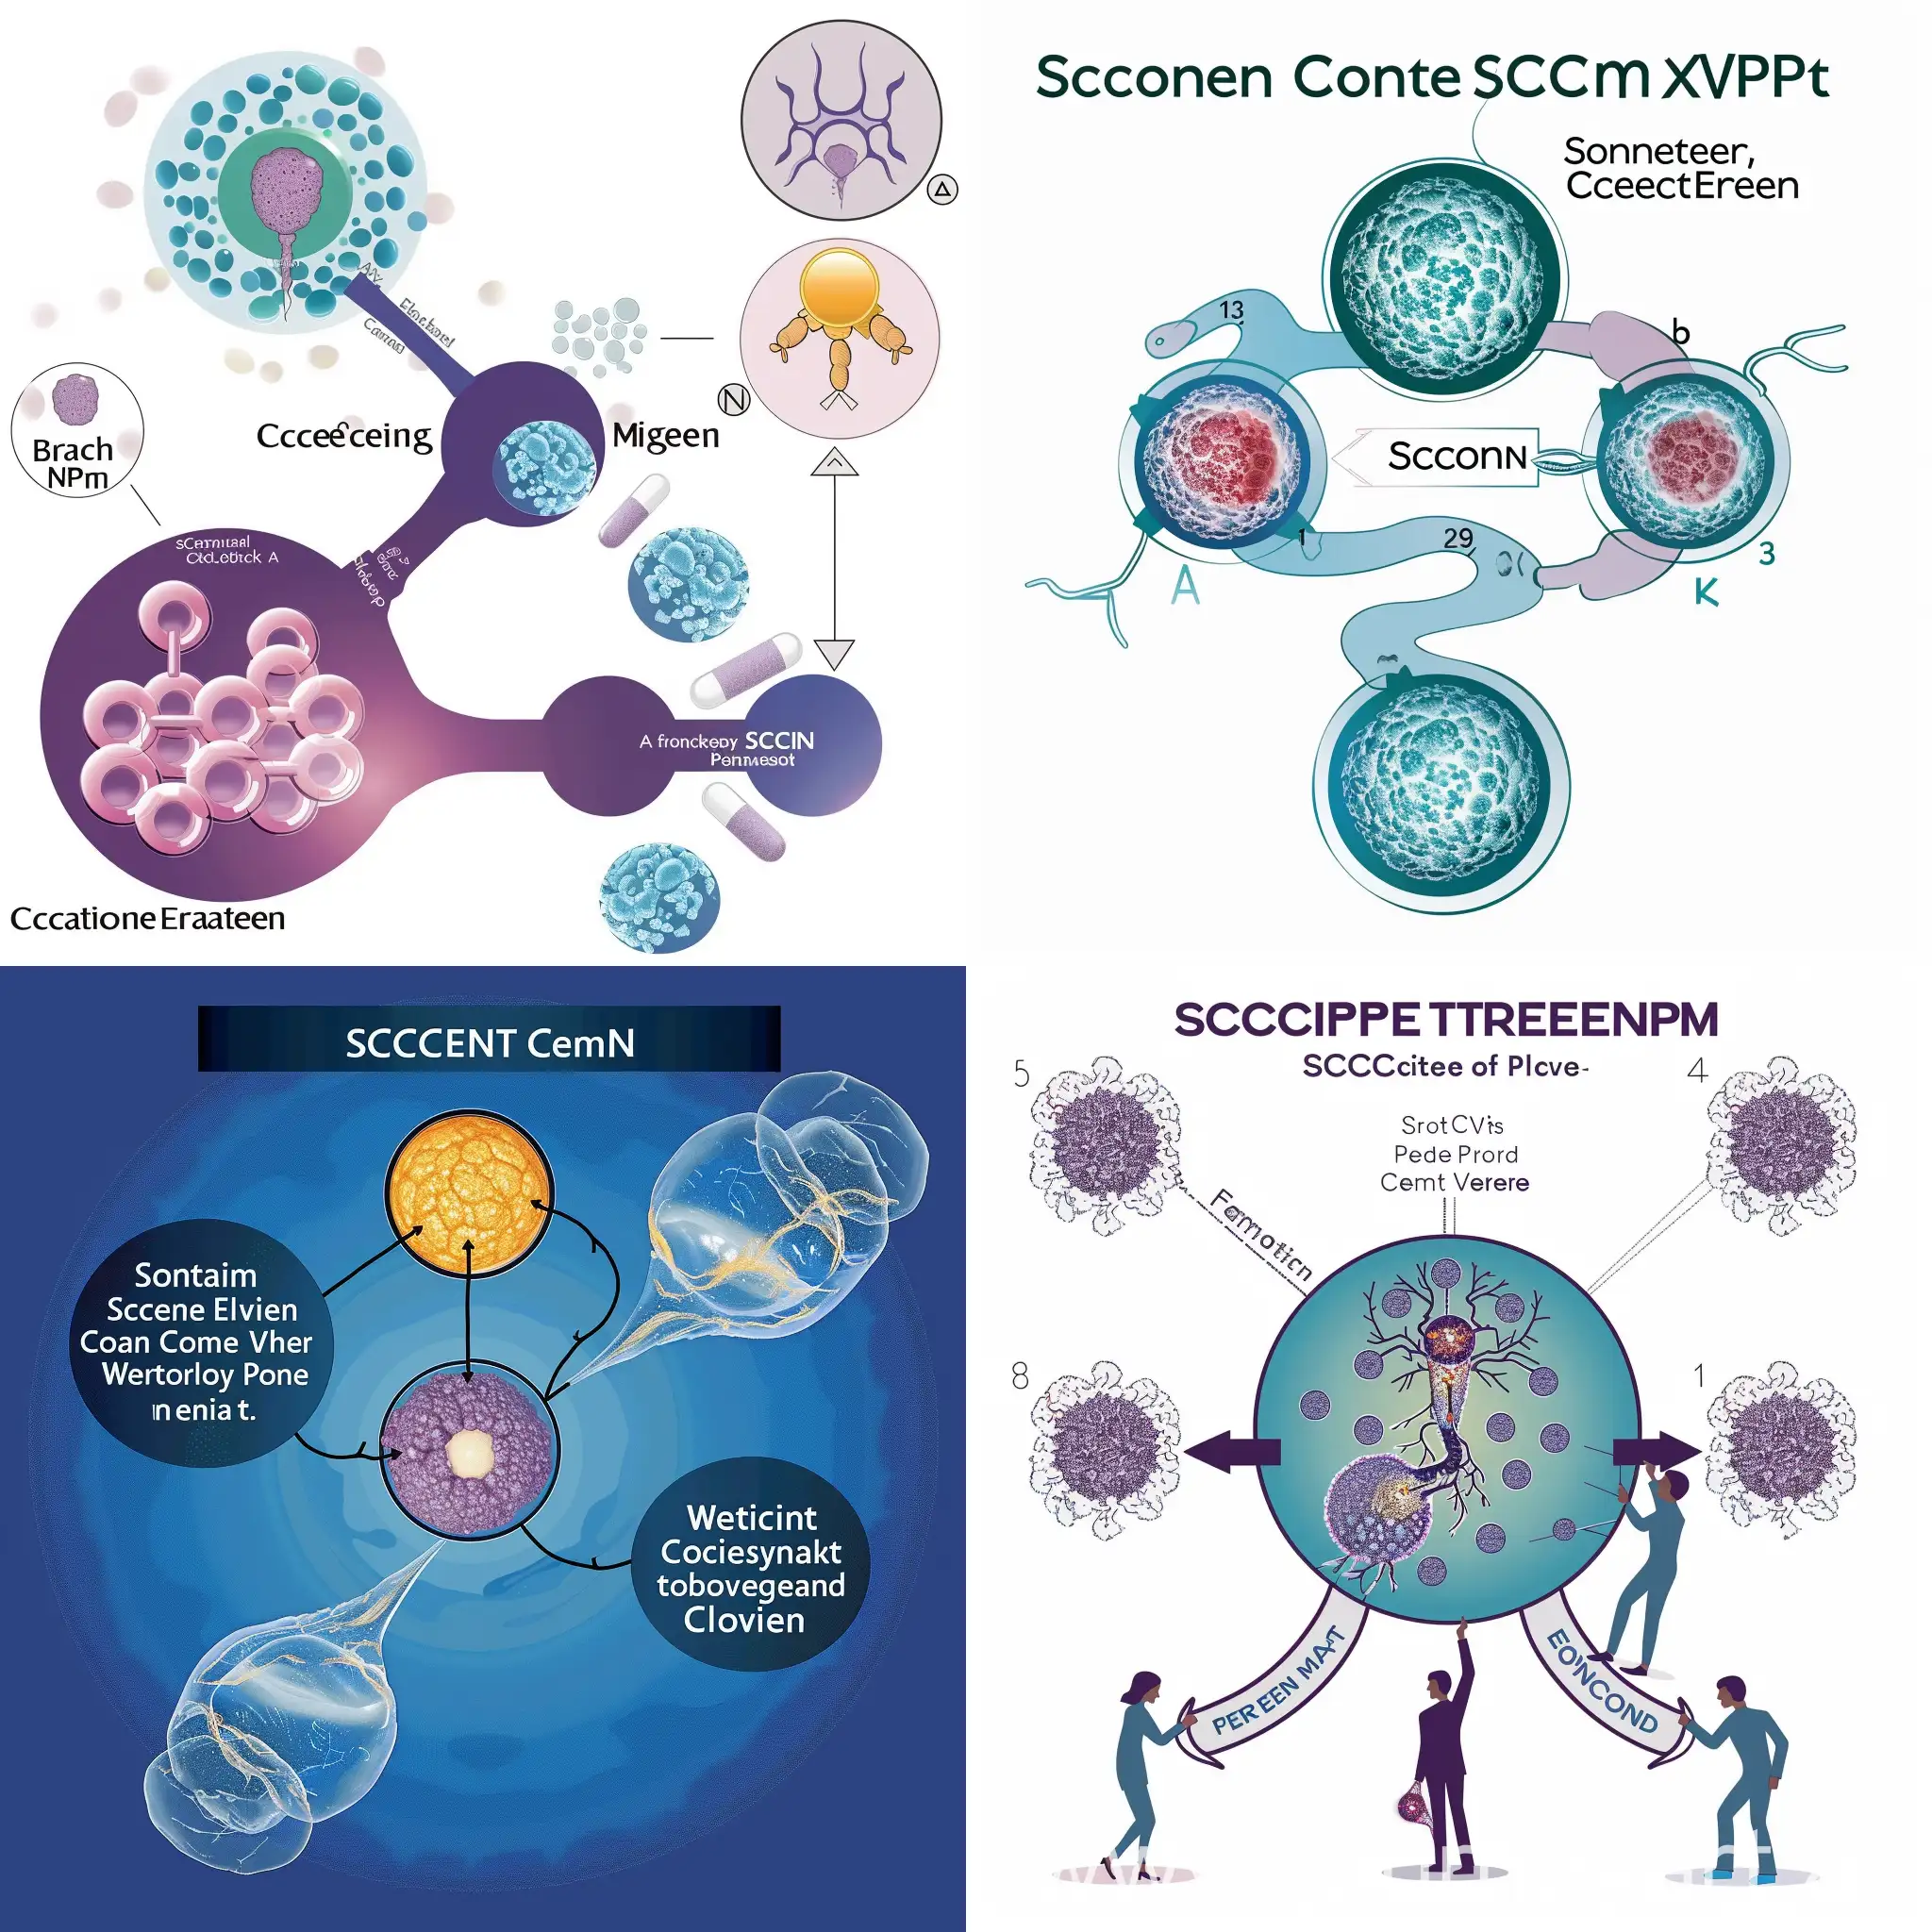 Illustration-Somatic-Cell-Nuclear-Transfer-SCNT-Process-for-Therapeutic-Cloning